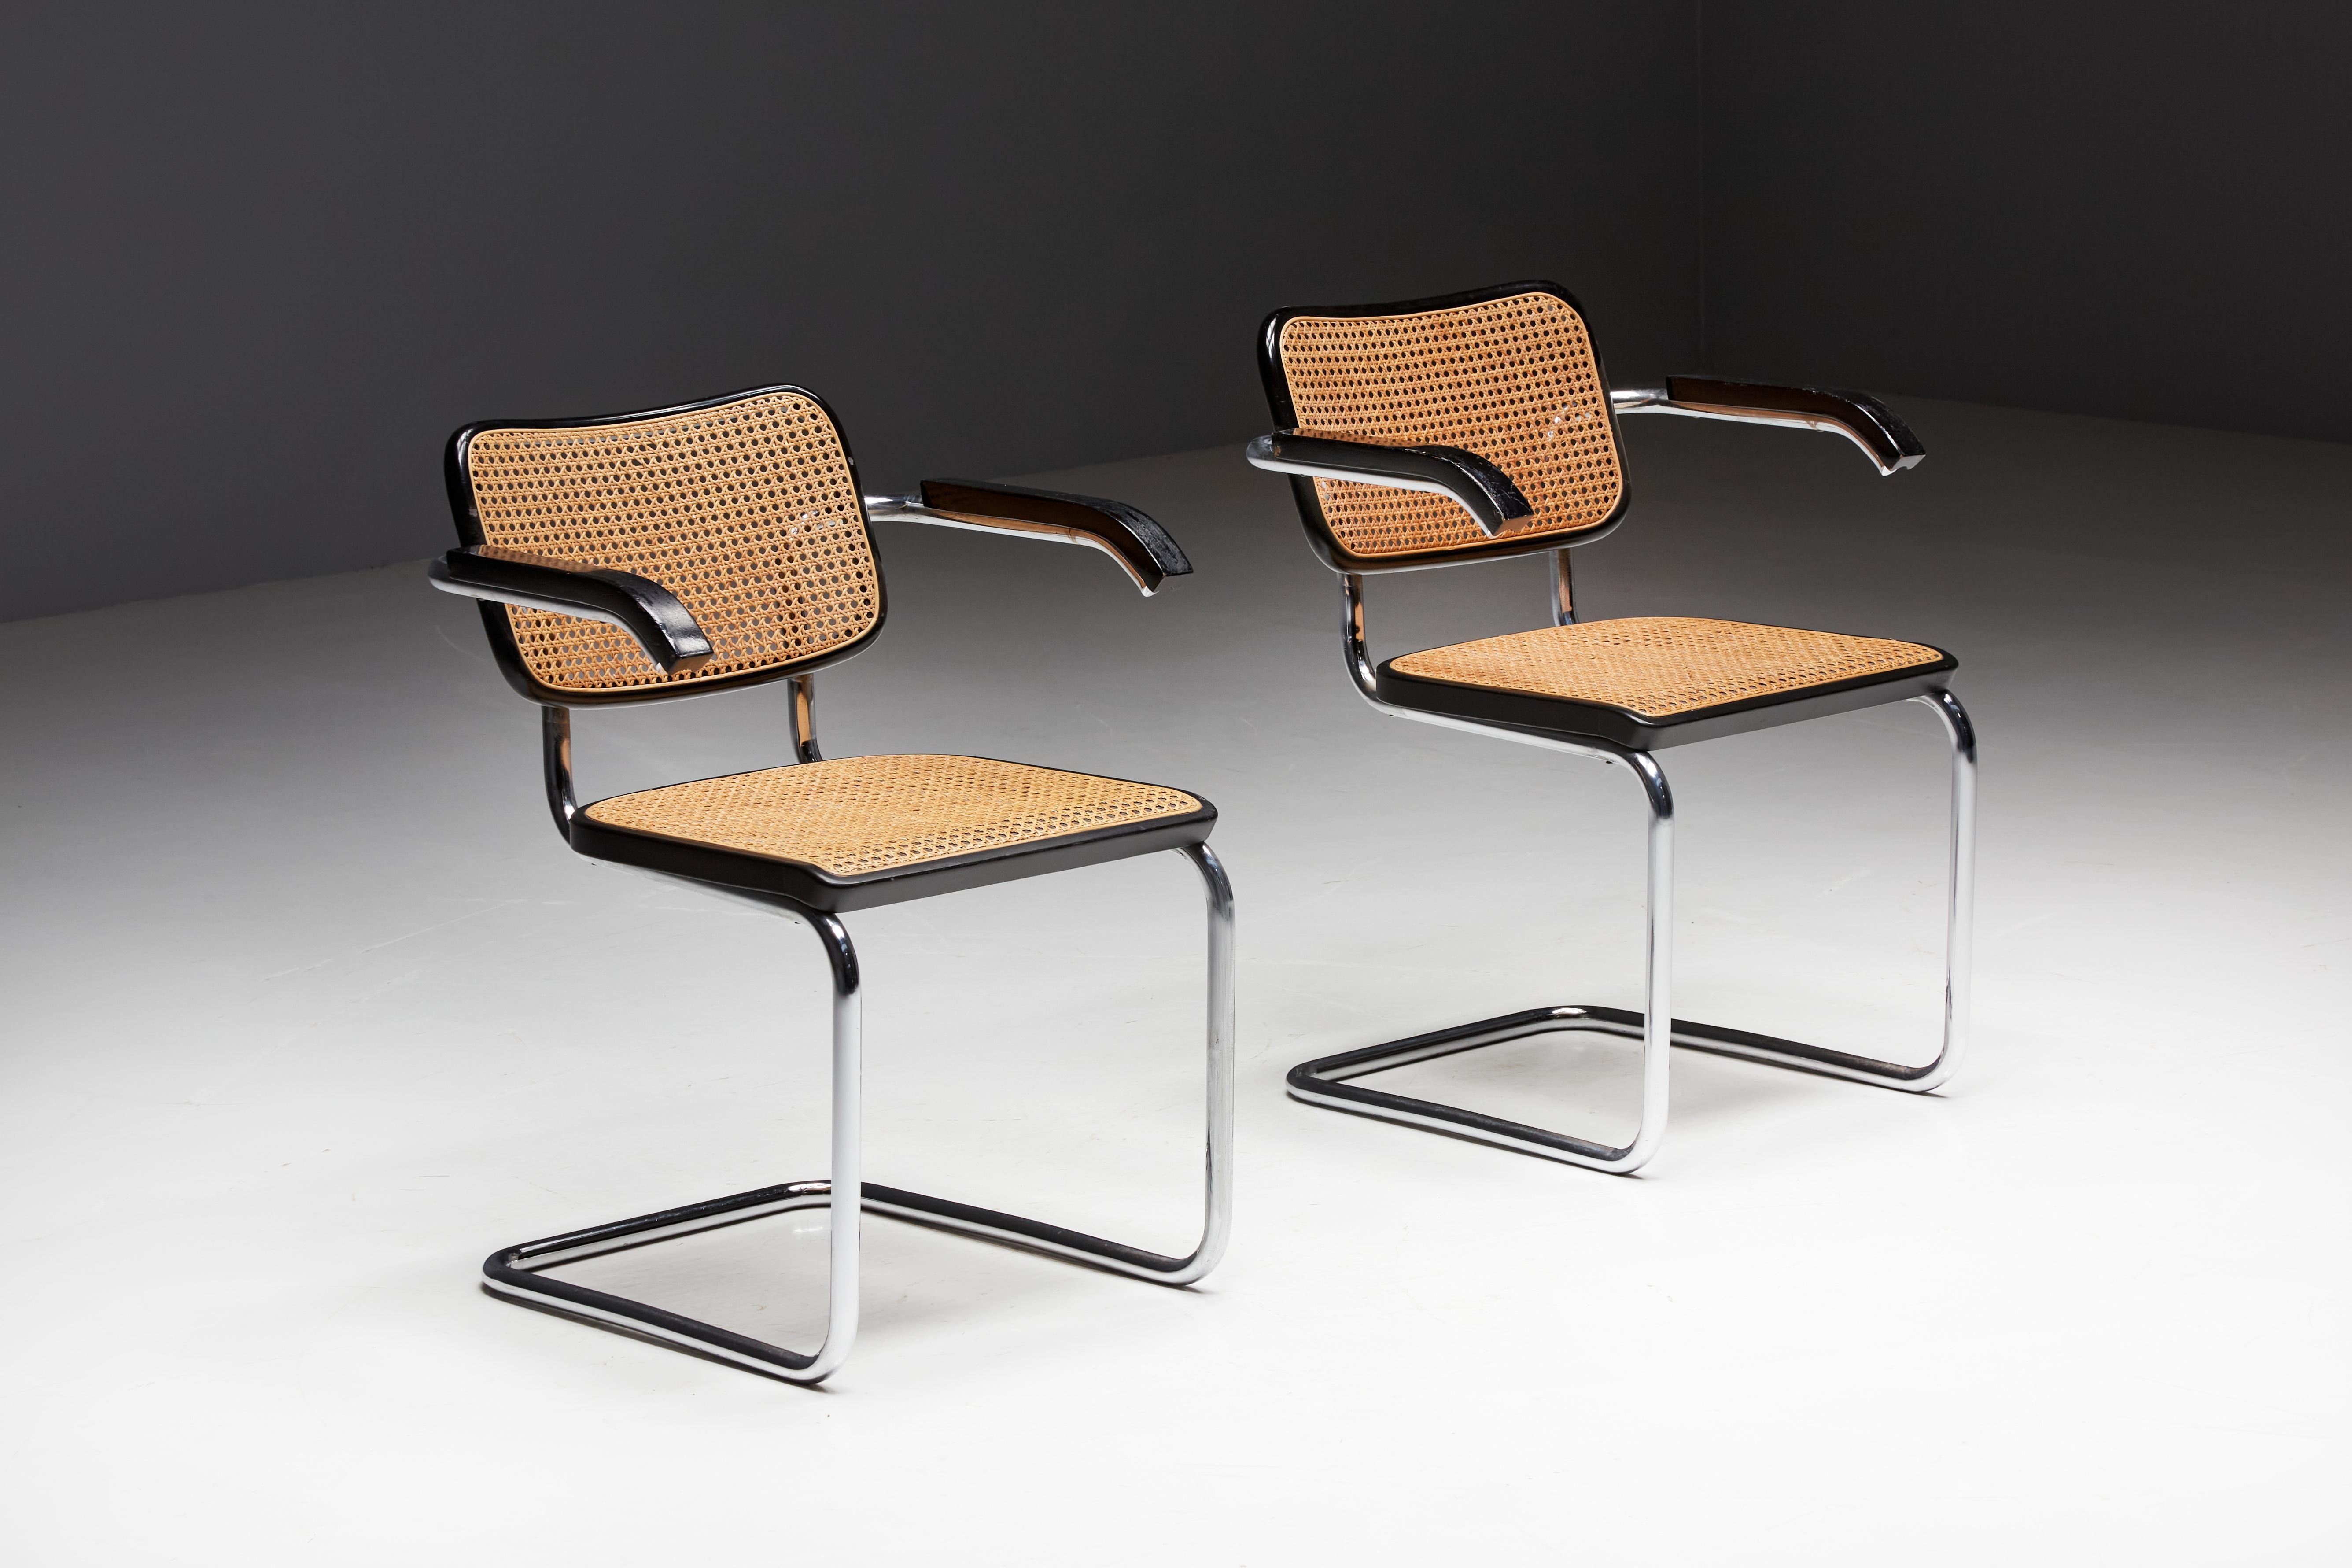 Cesca armchair model S64 by Marcel Breuer for Thonet, crafted in 1992. The frame, meticulously constructed from tubular chrome steel, exudes modern elegance, while the distinctive rattan seating adds a touch of warmth and comfort. The ebonized wood